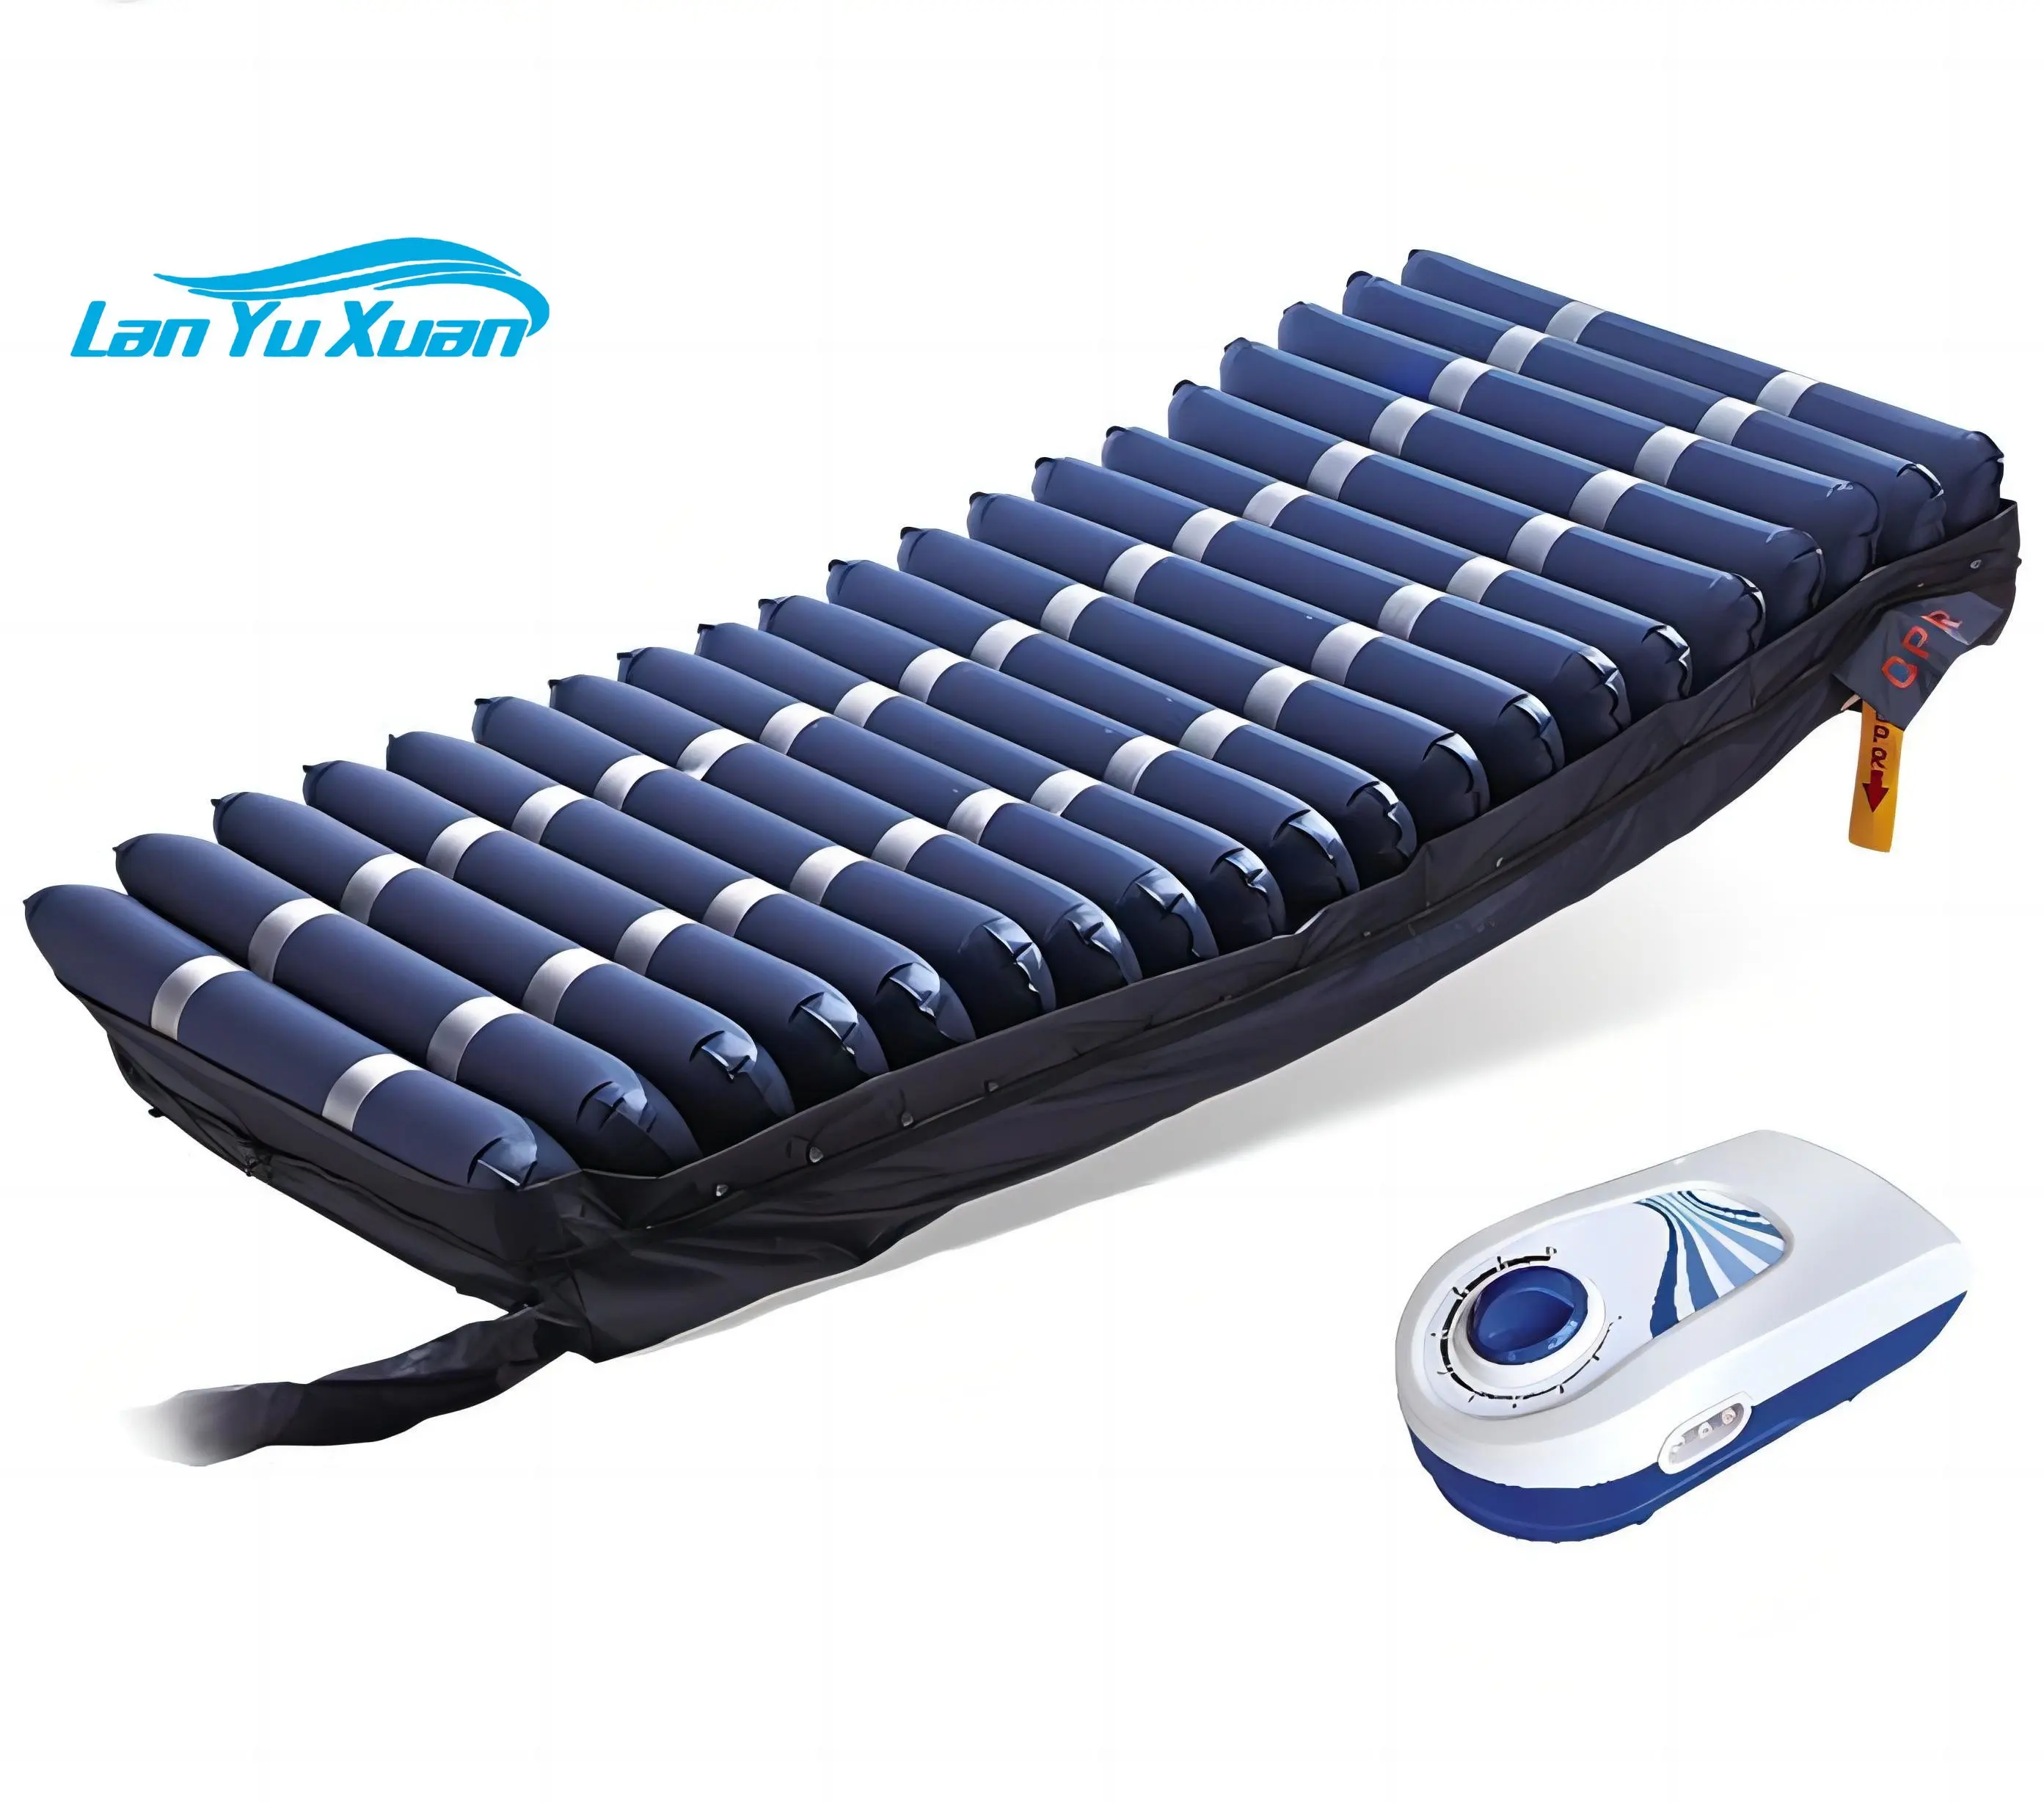 

Medical Anti-Bedsore Patient Pressure Inflatable Air Mattress With Pump for Hospital